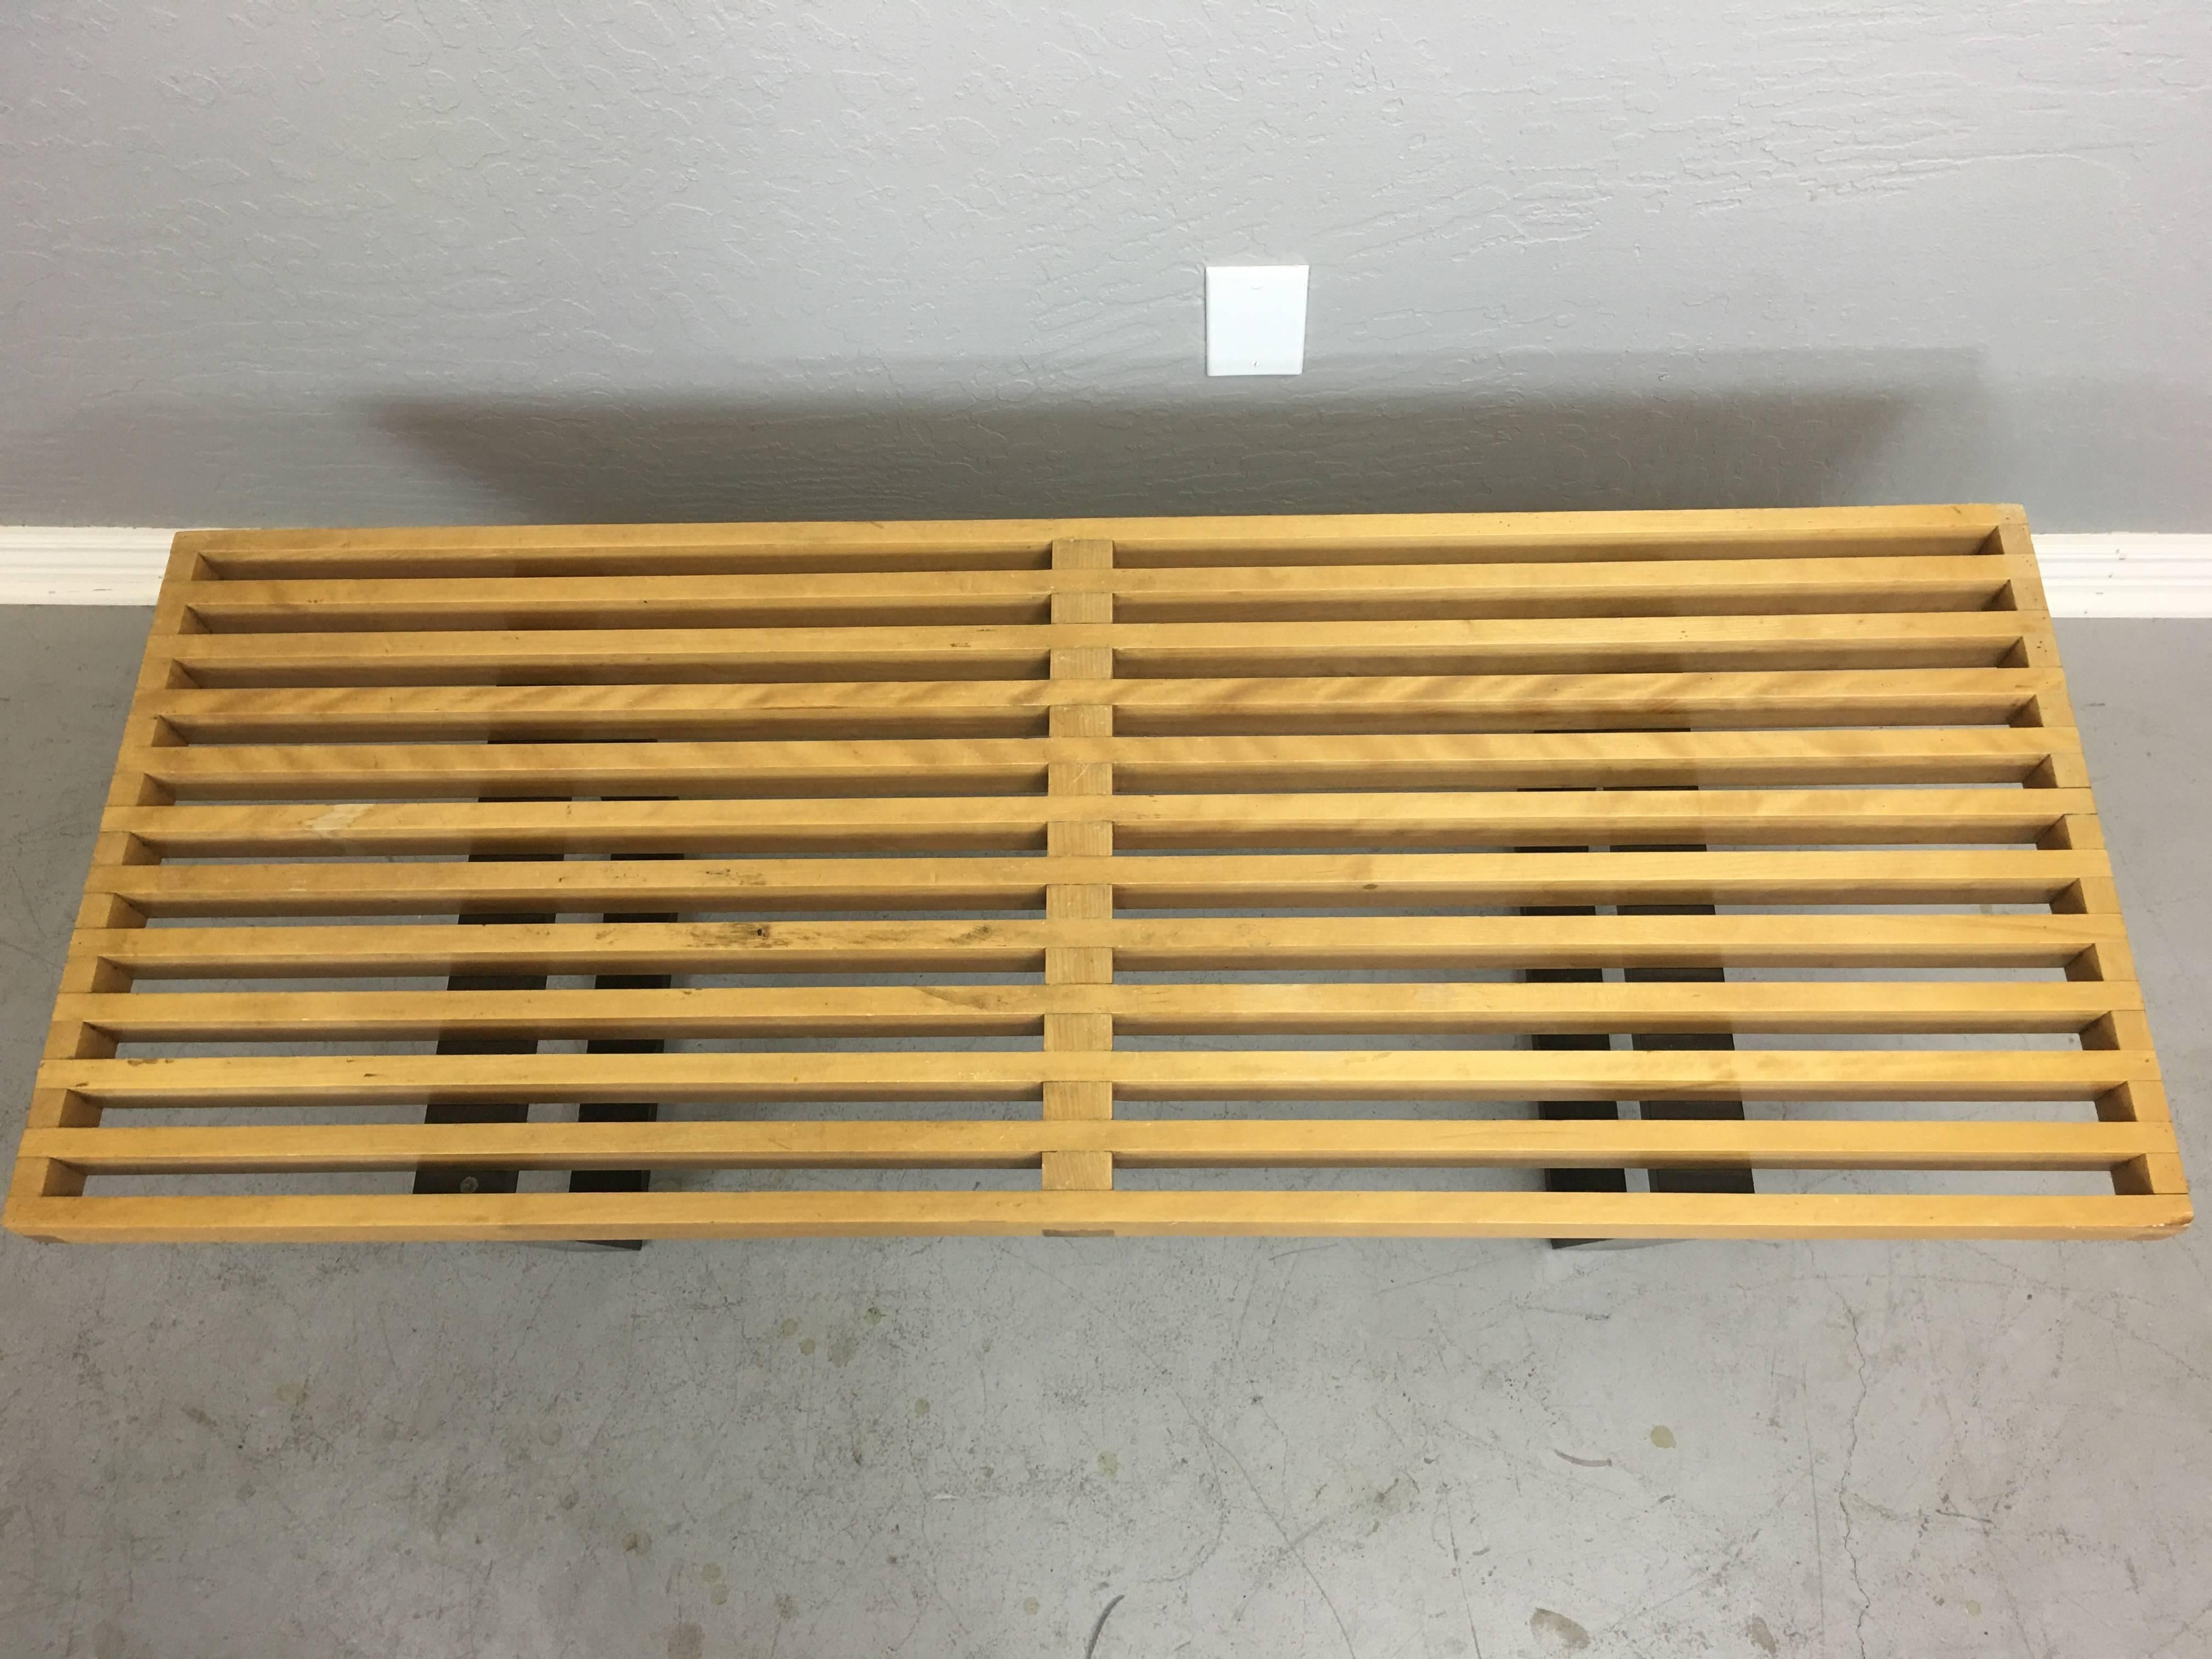 George Nelson wood slat bench for Herman Miller, circa 1970. Condition good. Minor lifewear. This bench measures 18.75